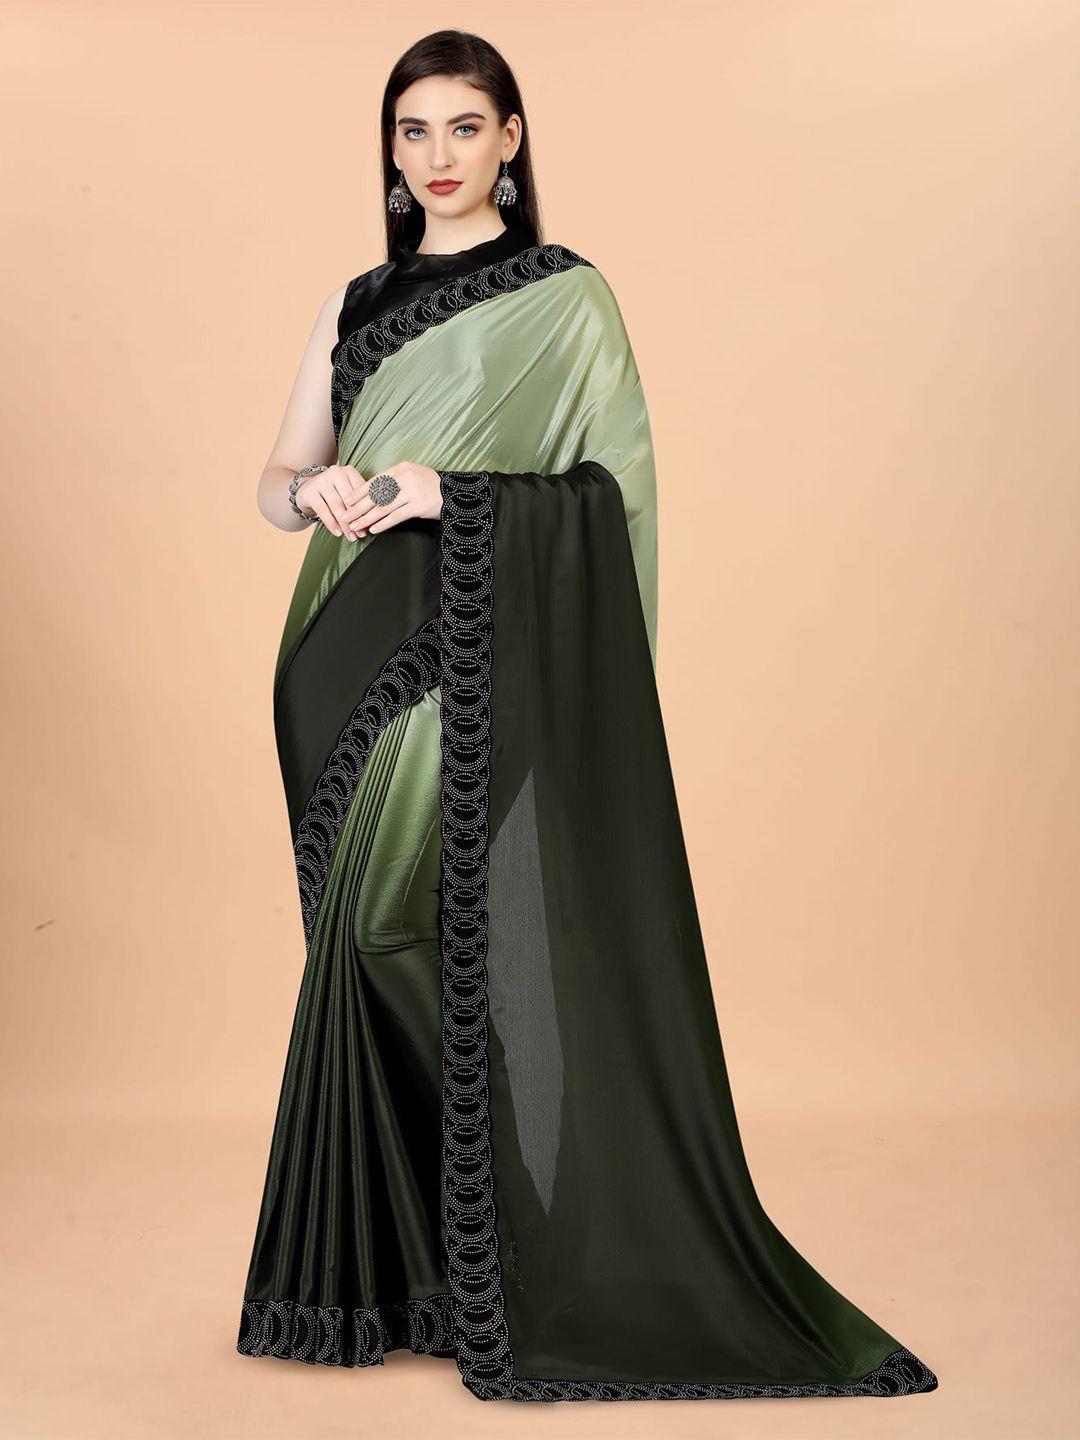 marabout ombre dyed beads and stones embellished silk cotton paithani saree